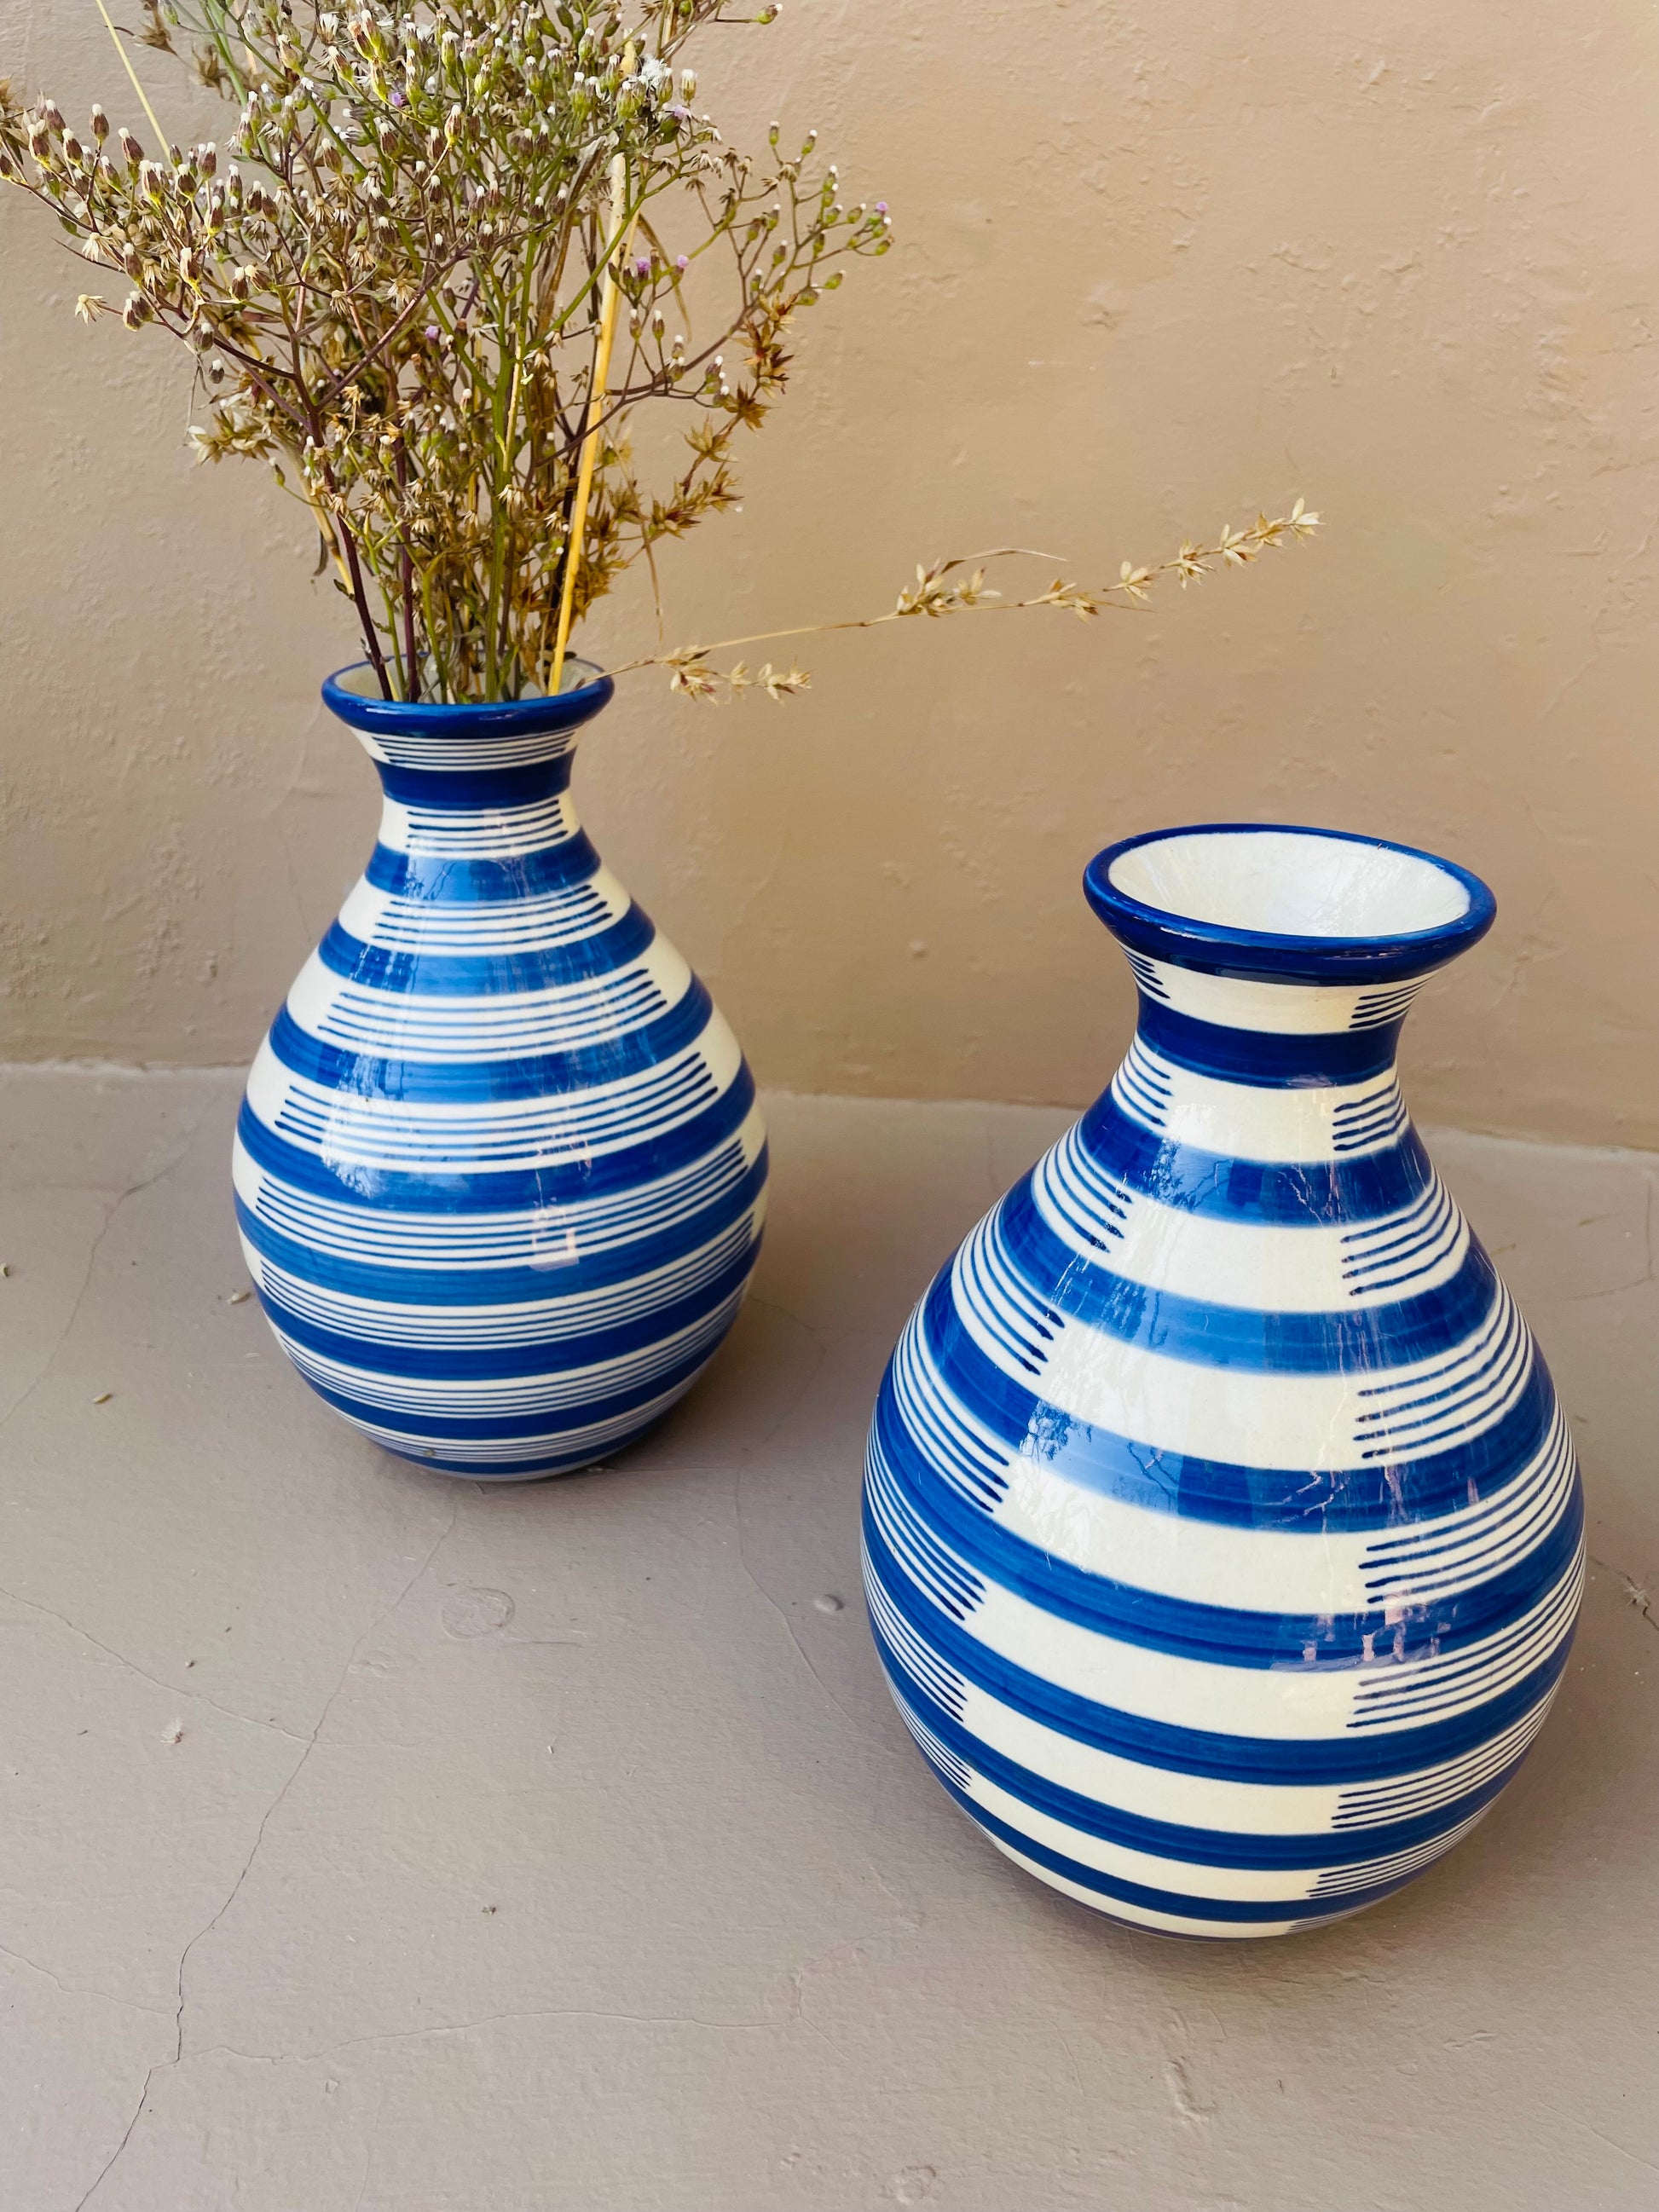  Blue Strip Hand Painted Vase, Botanical Display, Collection, Corner Décor, Entryway Accent, Everyday Must-Have, Glossy Finish, Gorgeous Vase, Hand Painted Vase, Large-Scale Vase, Mantel Décor, Minimalist Design, Modern Shape, Organic Form, Tabletop Décor, White and Blue Vase, tesu